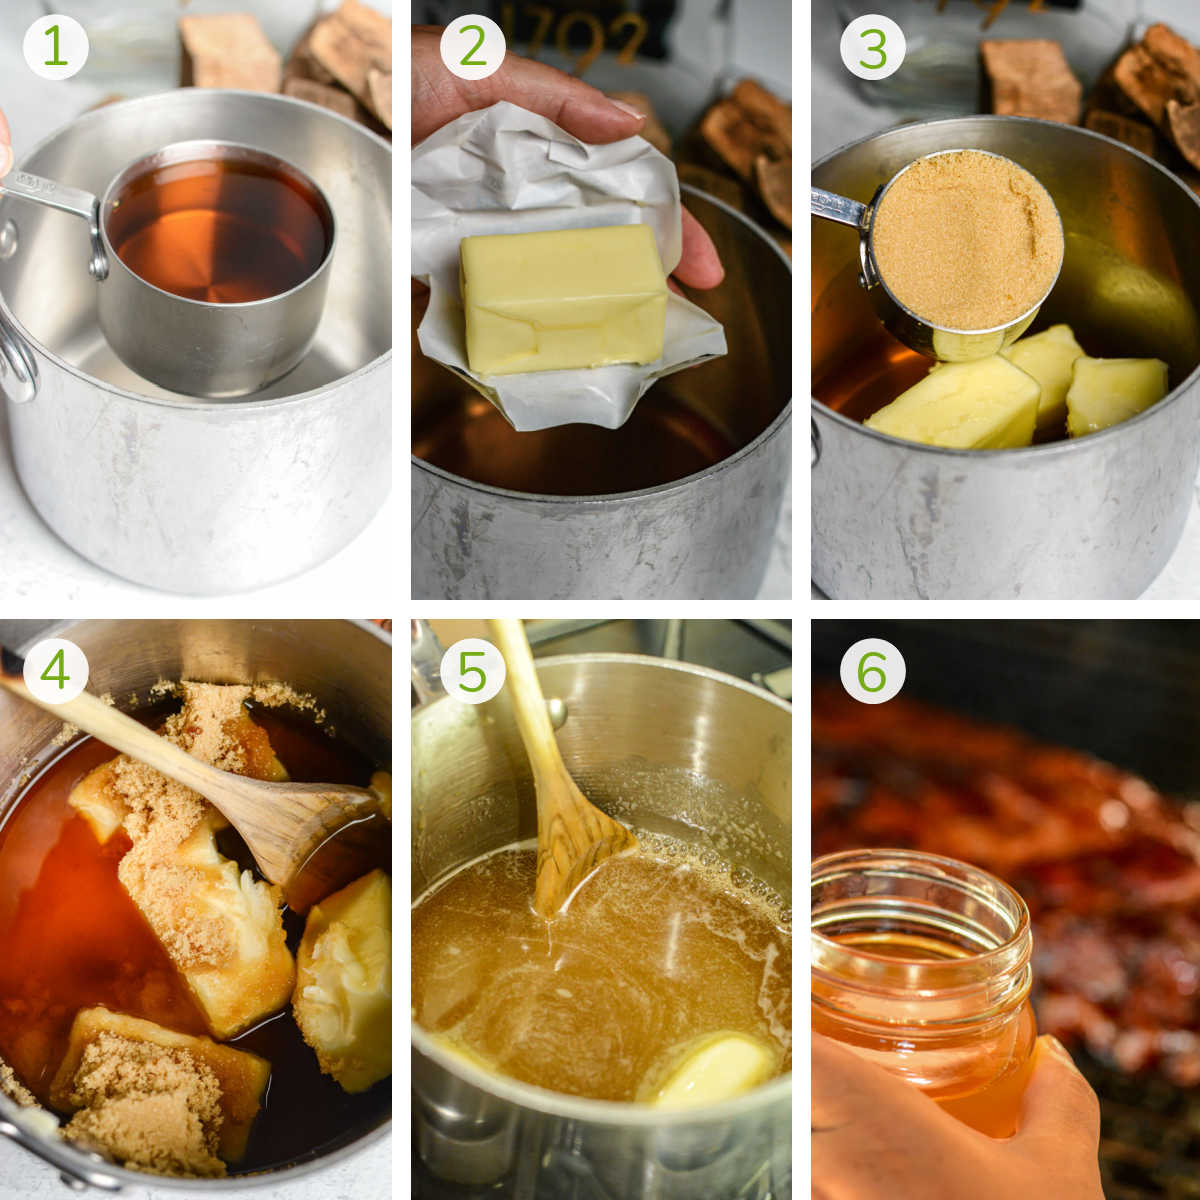 six process photos showing how to make the whiskey BBQ sauce by mixing the ingredients, stirring and simmering.